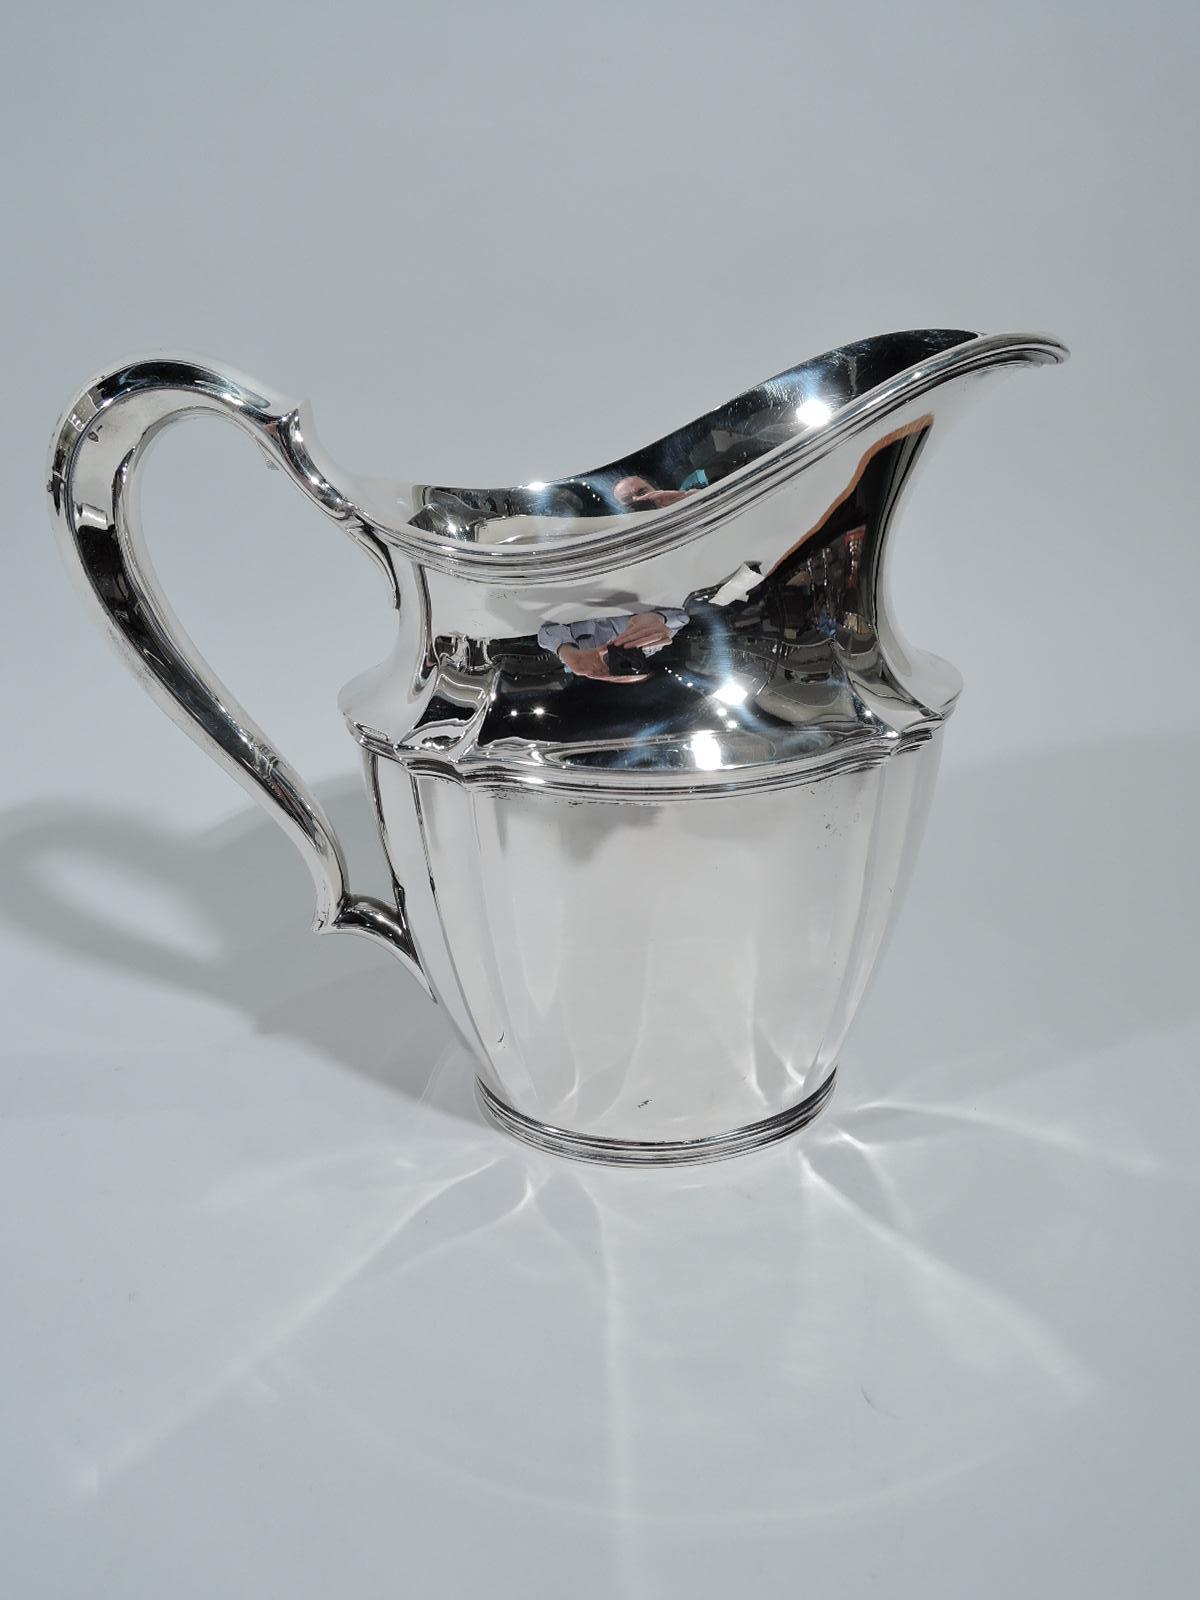 Traditional sterling silver water pitcher. Made by Tiffany & Co. in New York, circa 1910. Tapering oval body, helmet mouth, and high-looping handle. Fluting and reeding. Fully marked including pattern no. 14997D, director’s letter m, and volume (3